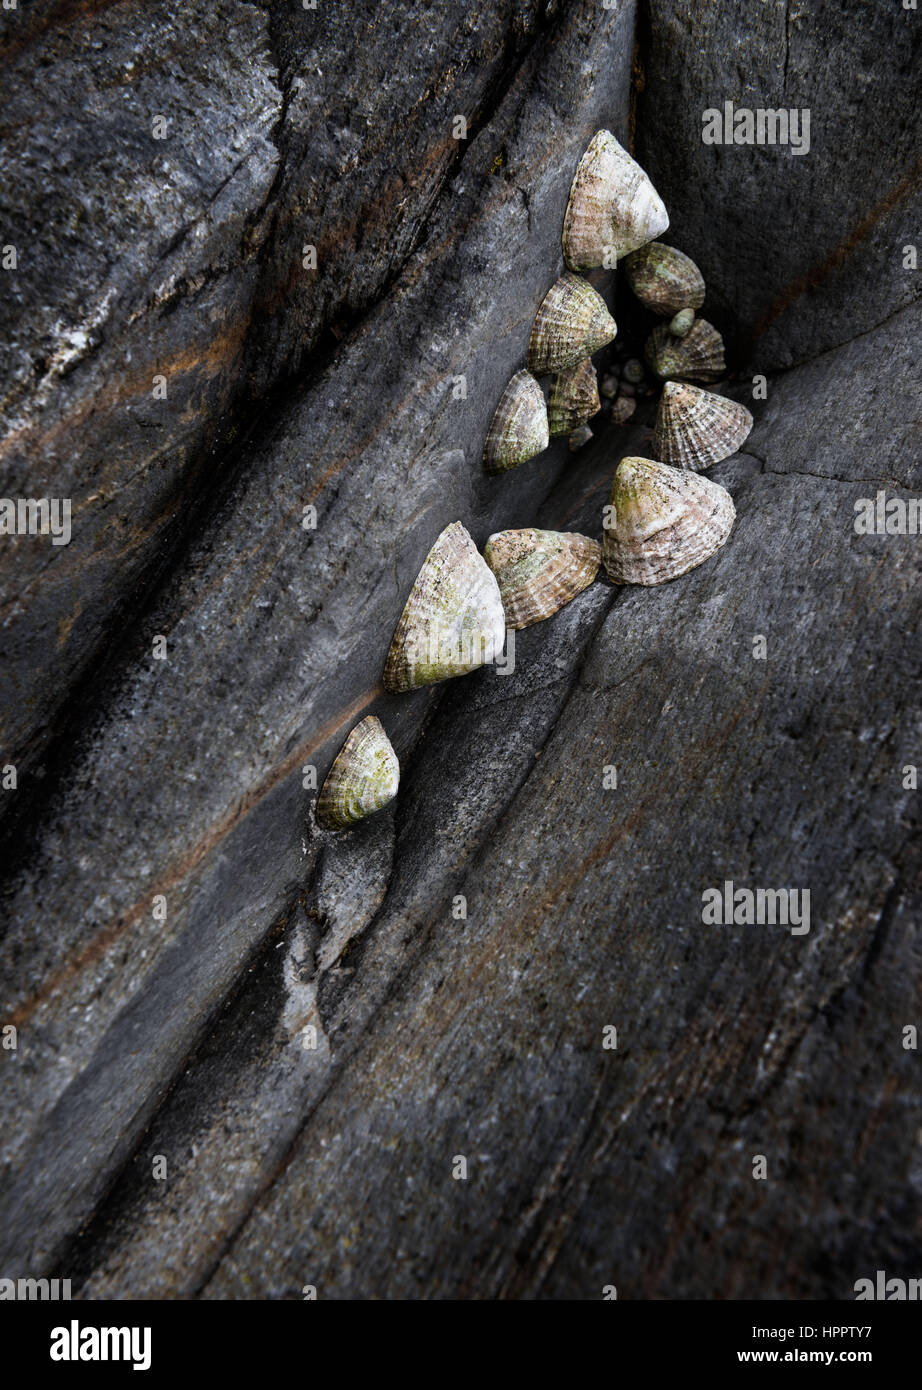 Limpets clinging to rocks, Fishguard, Wales. Stock Photo